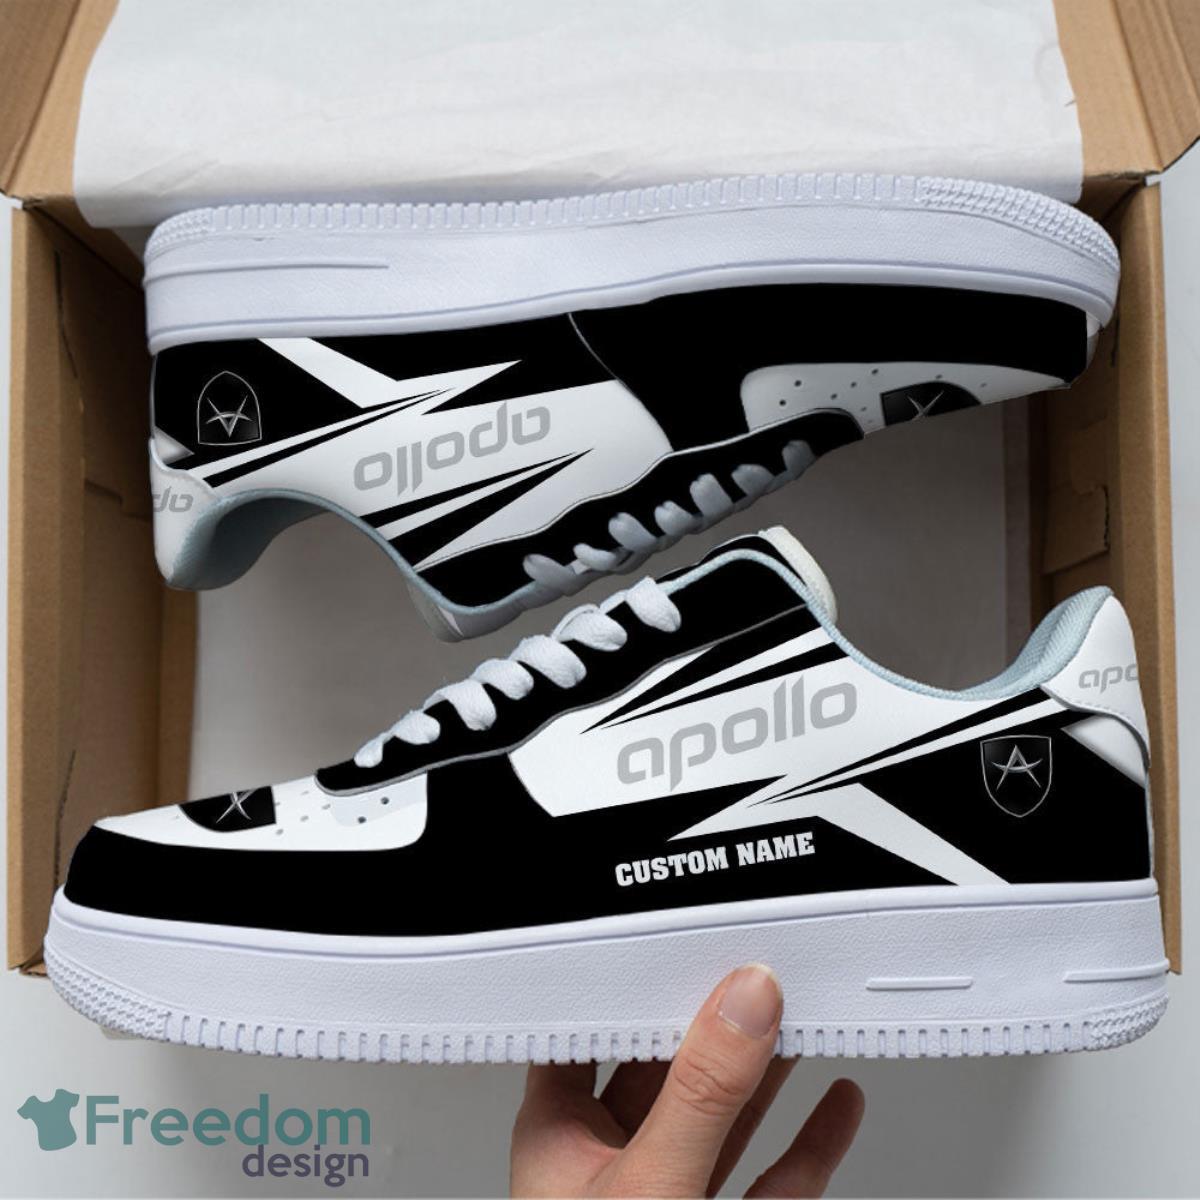 Apollo Custom Name Air Force Shoes Sport Sneakers For Men Women Product Photo 1